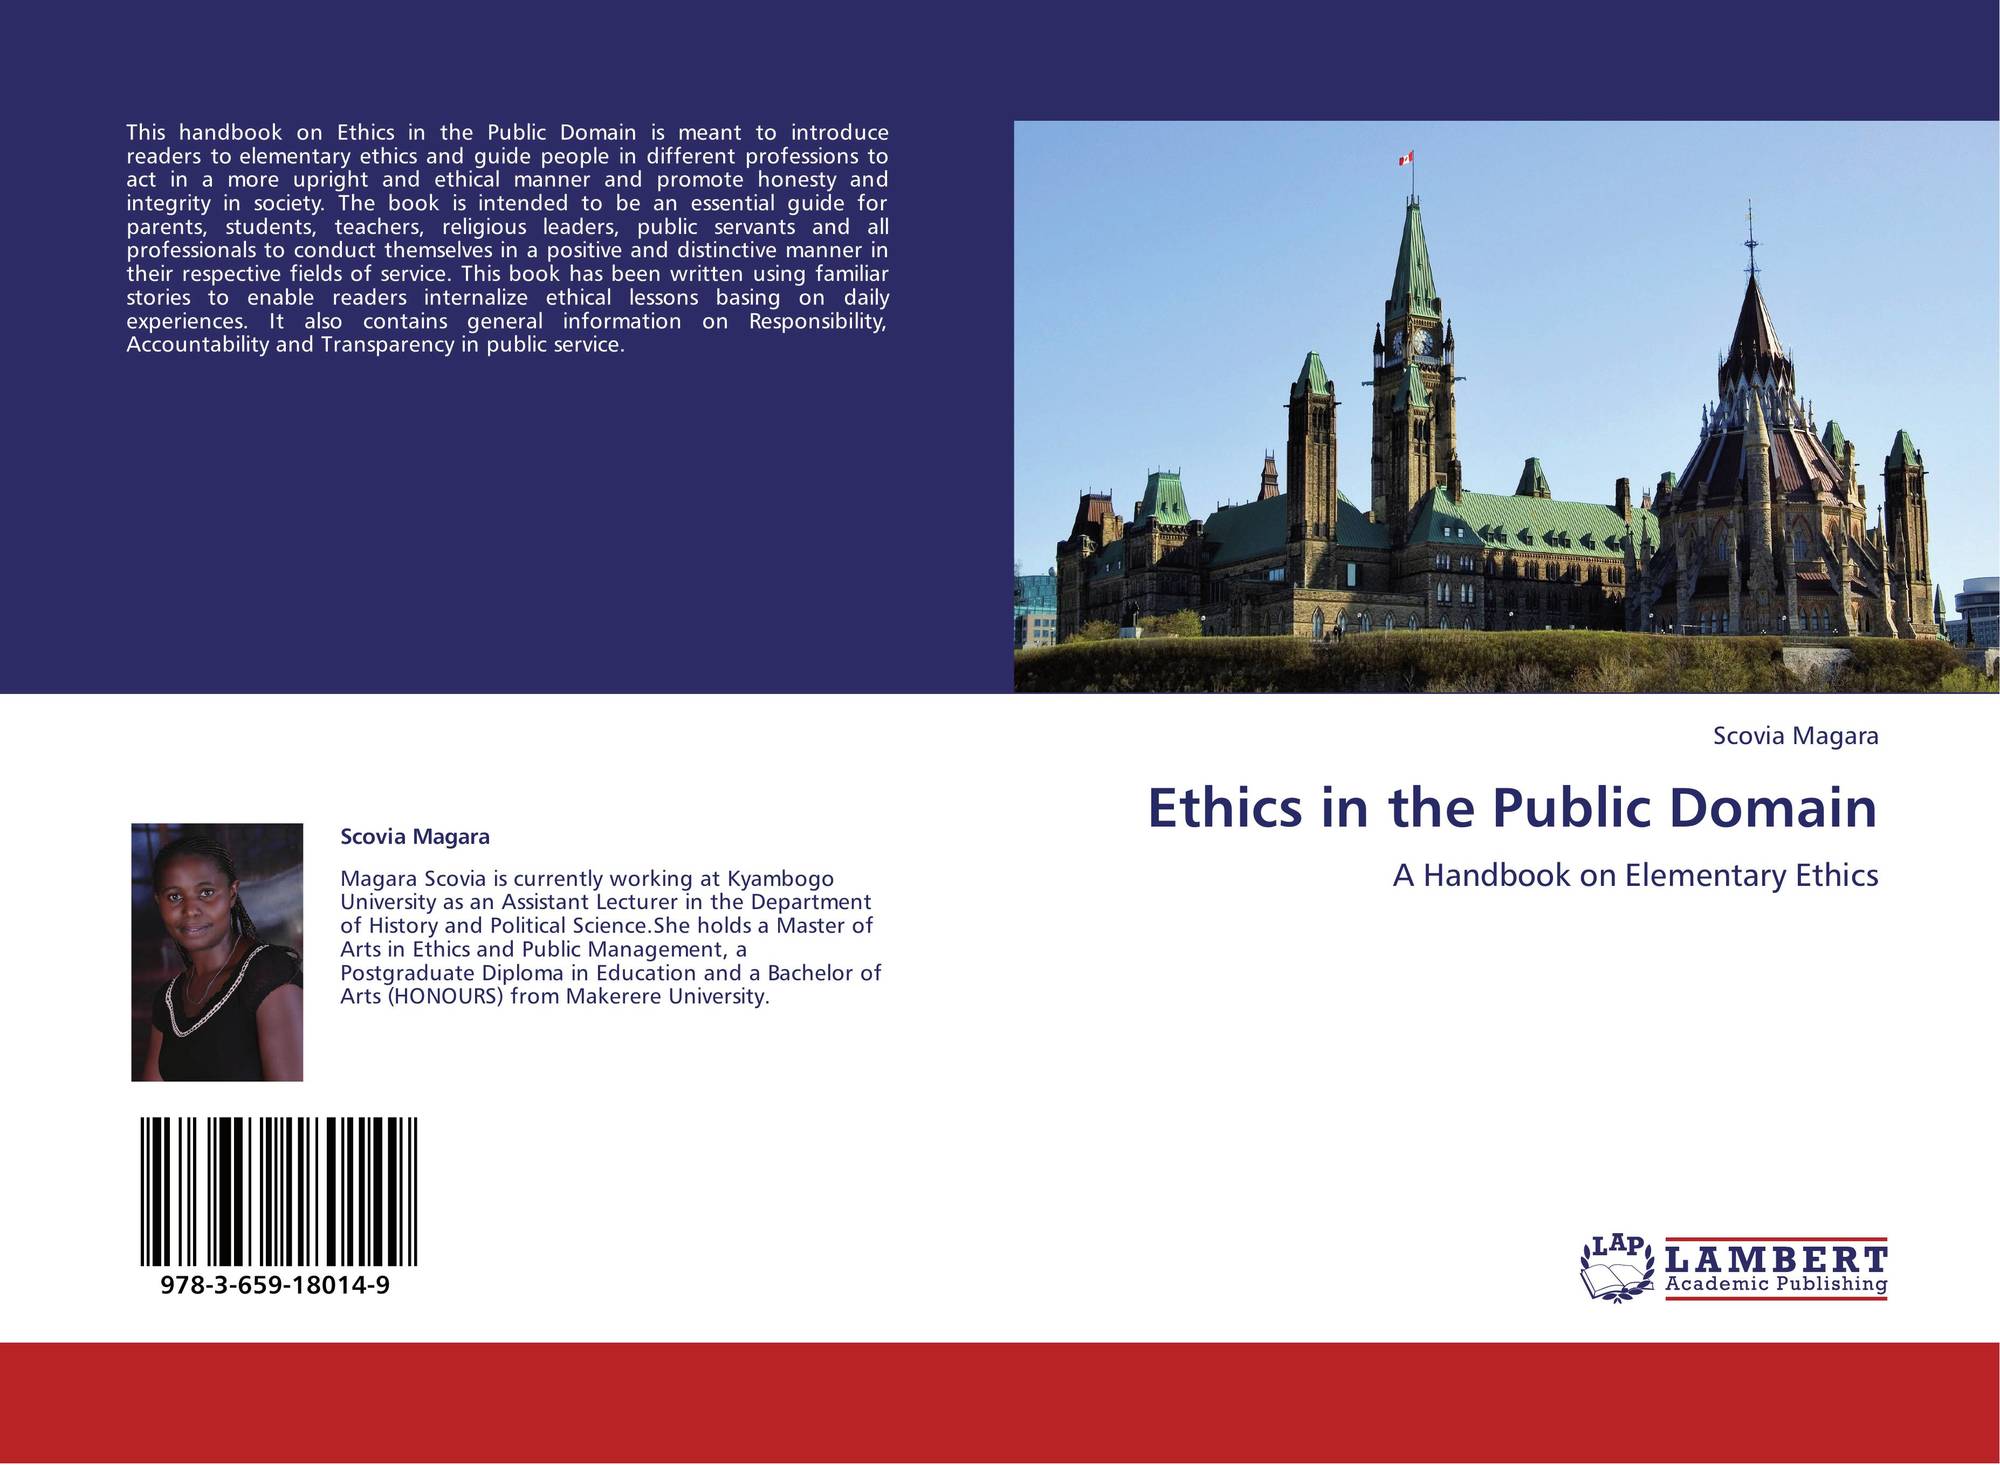 ethics in hrm